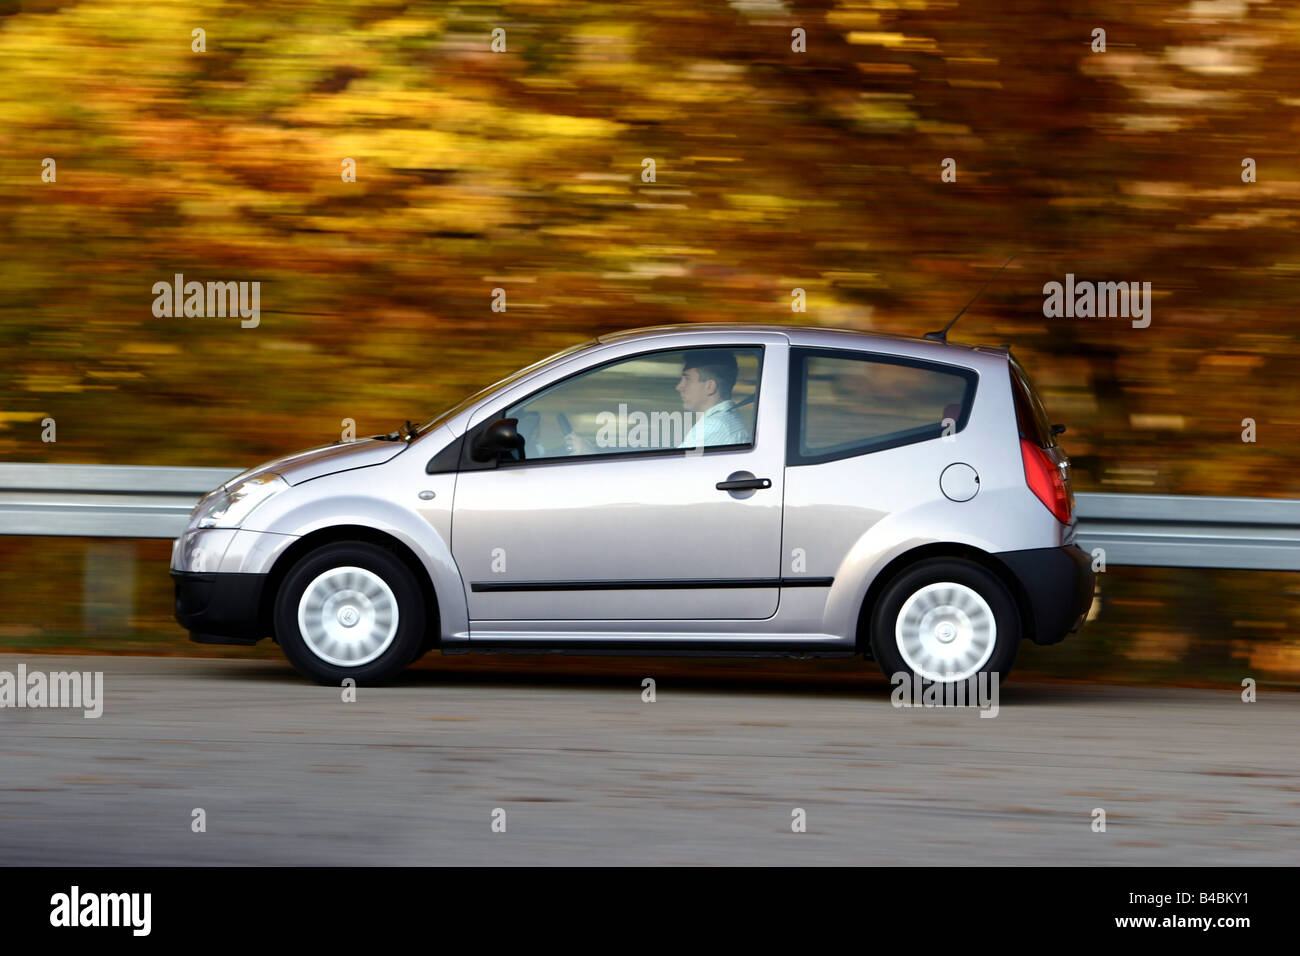 Car, Citroen C2 1.4 HDi SX, model year 2003-, silver, Miniapprox.s, Limousine, FGHDS, driving, side view, country road Stock Photo